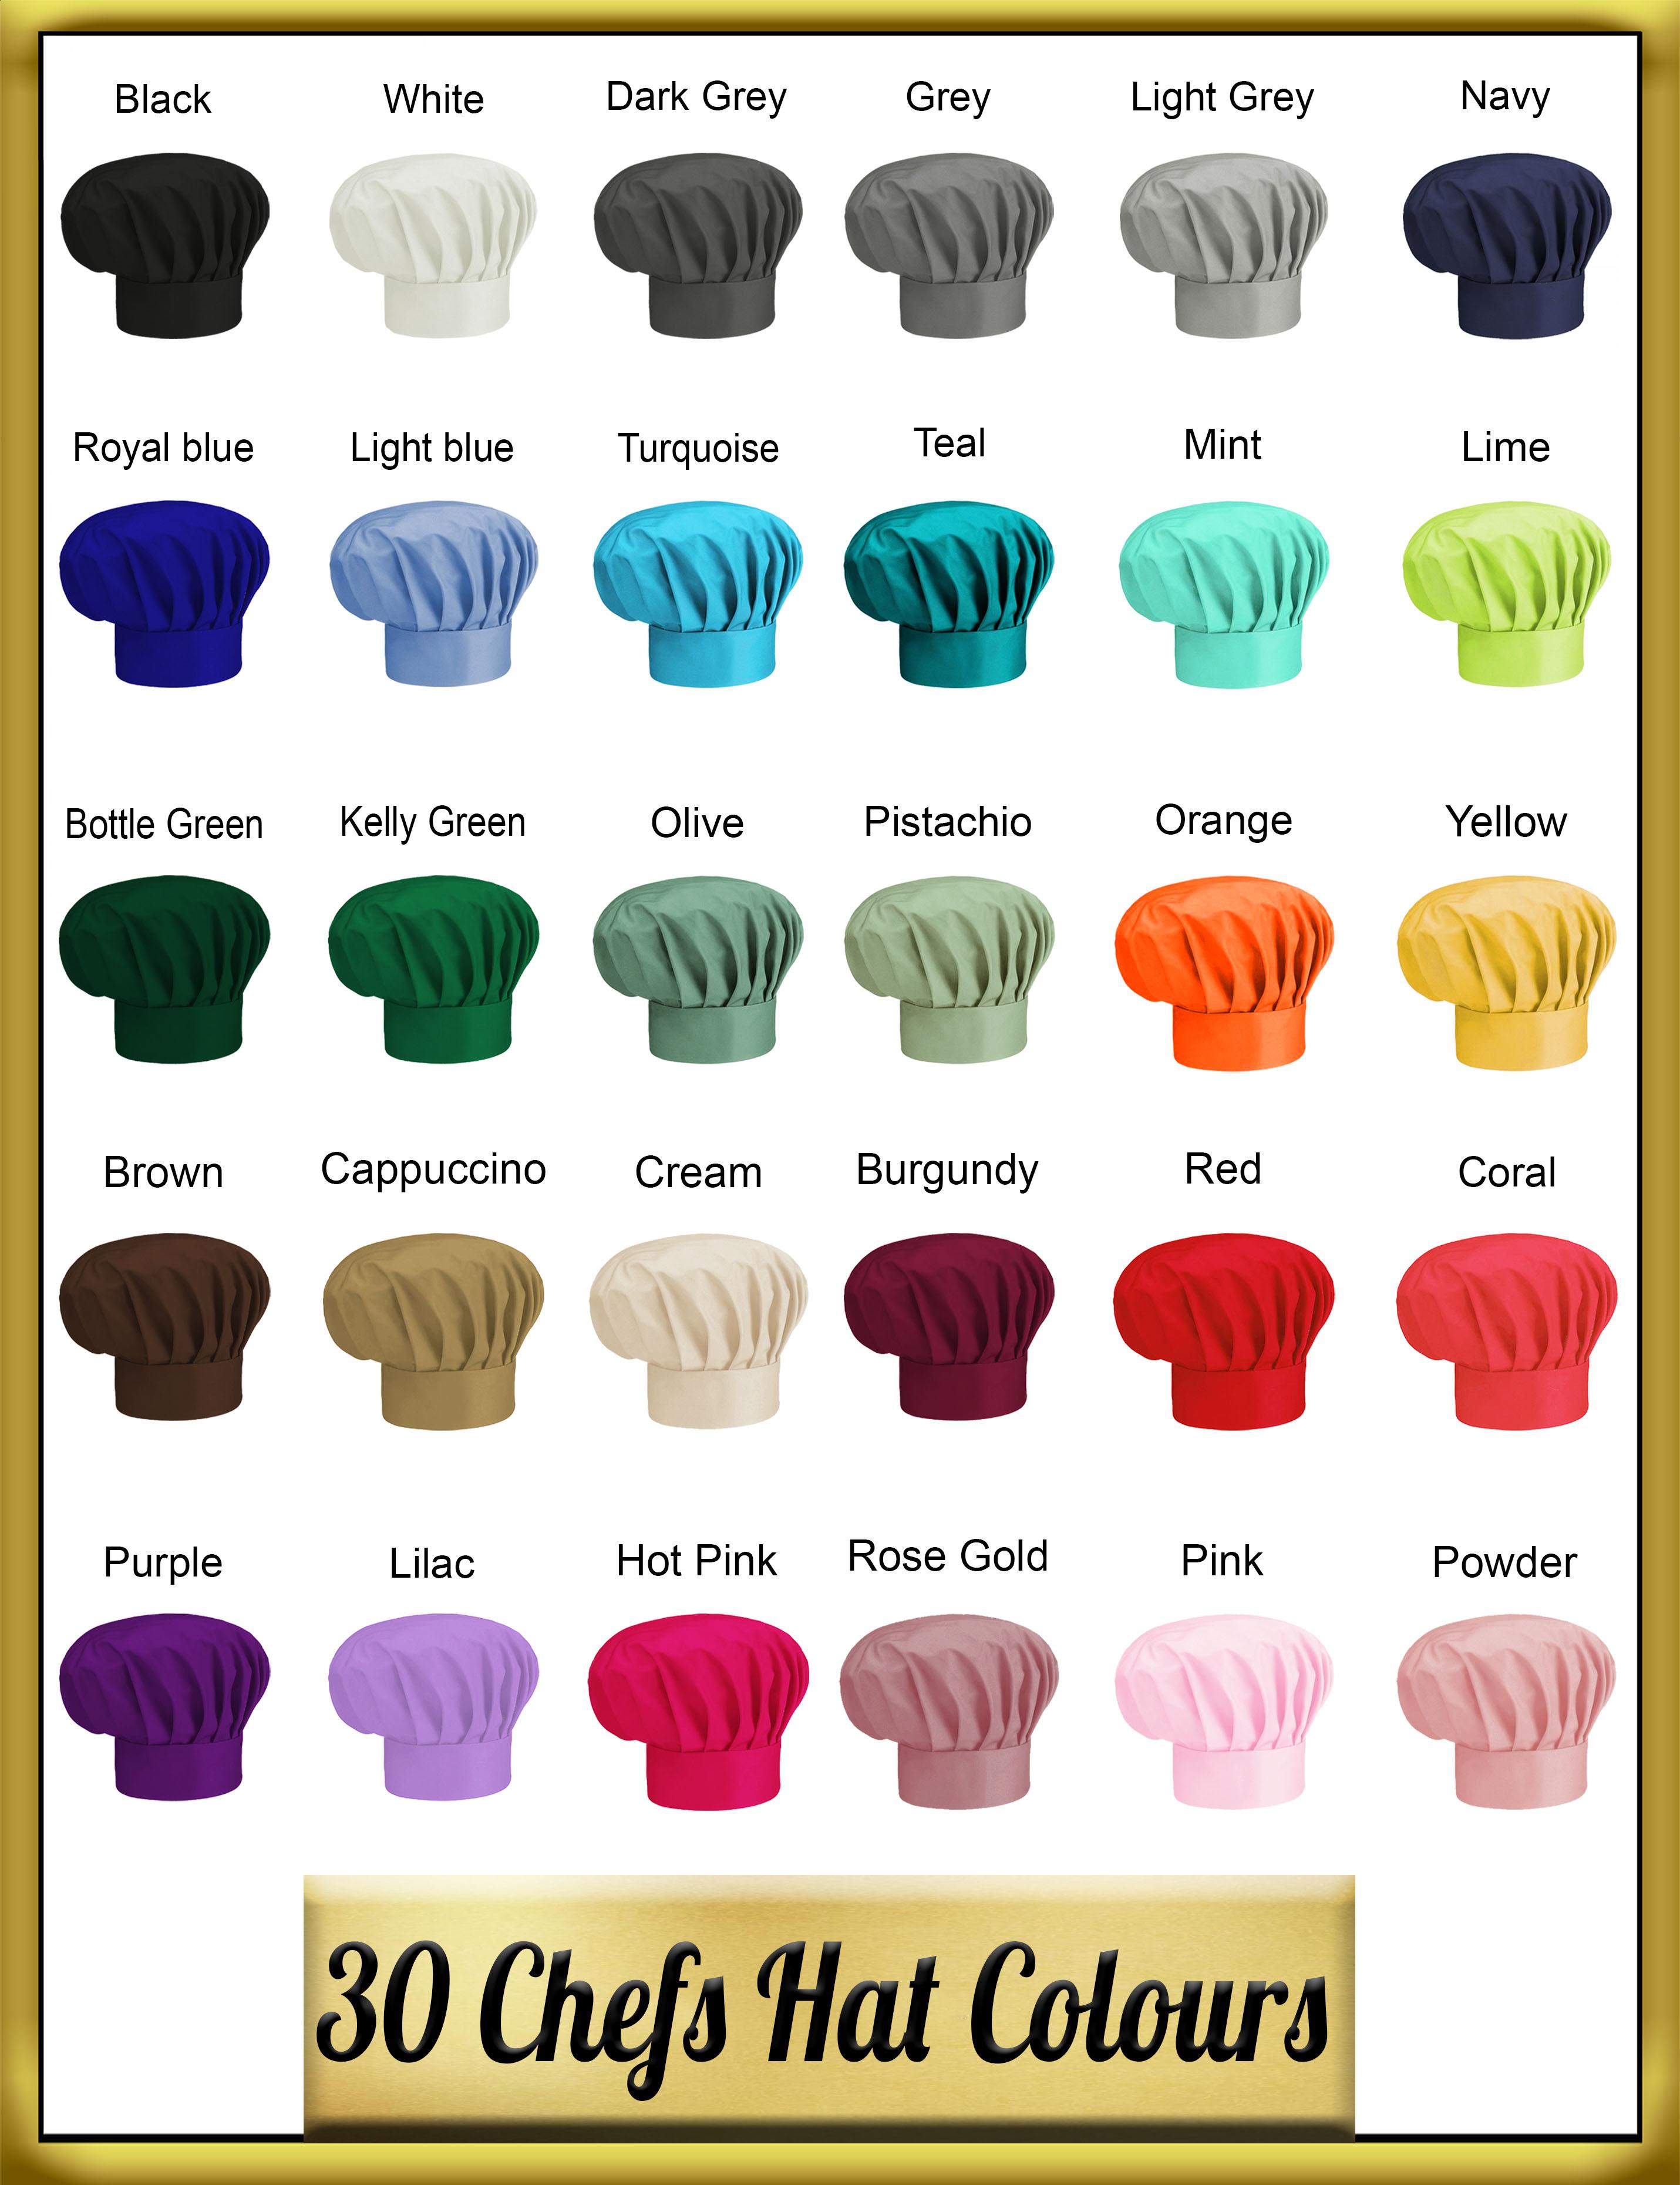 Full colour printed chef hat colours